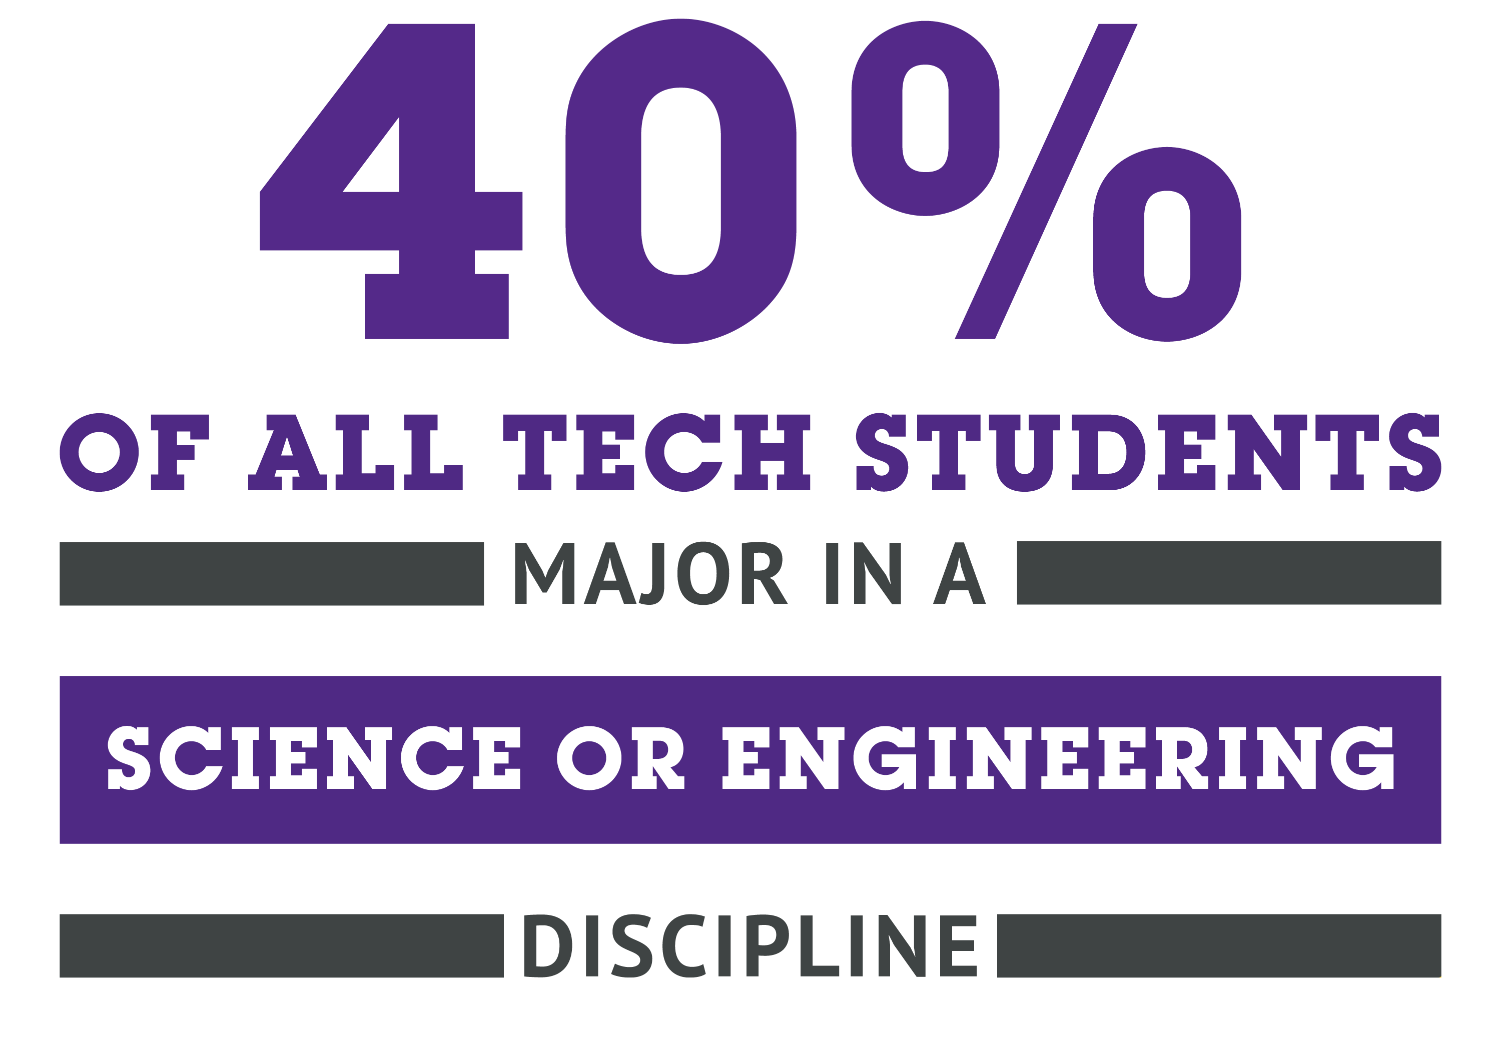 40% of all Tech students major in a science or engineering discipline